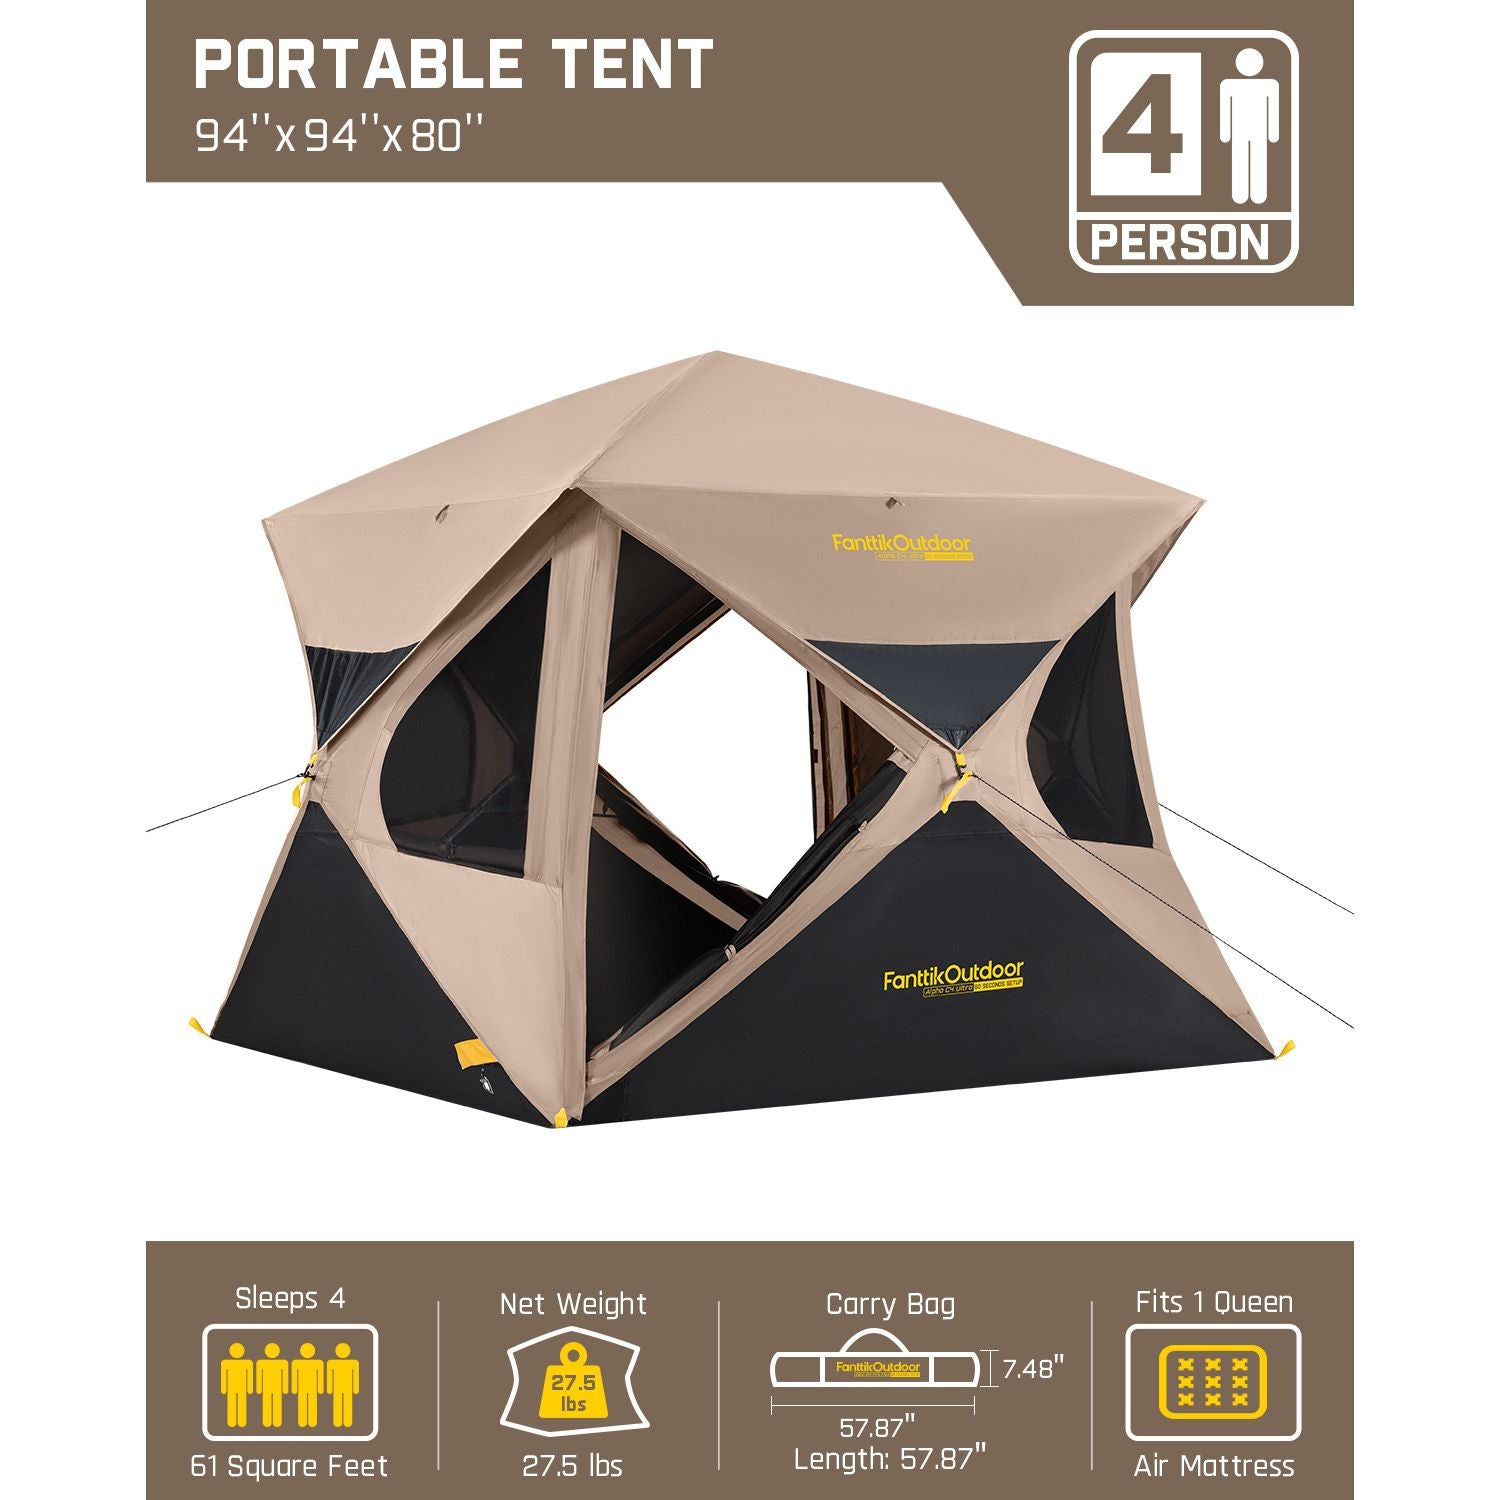 FanttikOutdoor Alpha C4 Ultra Instant Cabin Tent, beige and black, sleeps 4, measures 94x94x80 inches, 61 square feet, 27.5 lbs weight, fits one queen-size air mattress